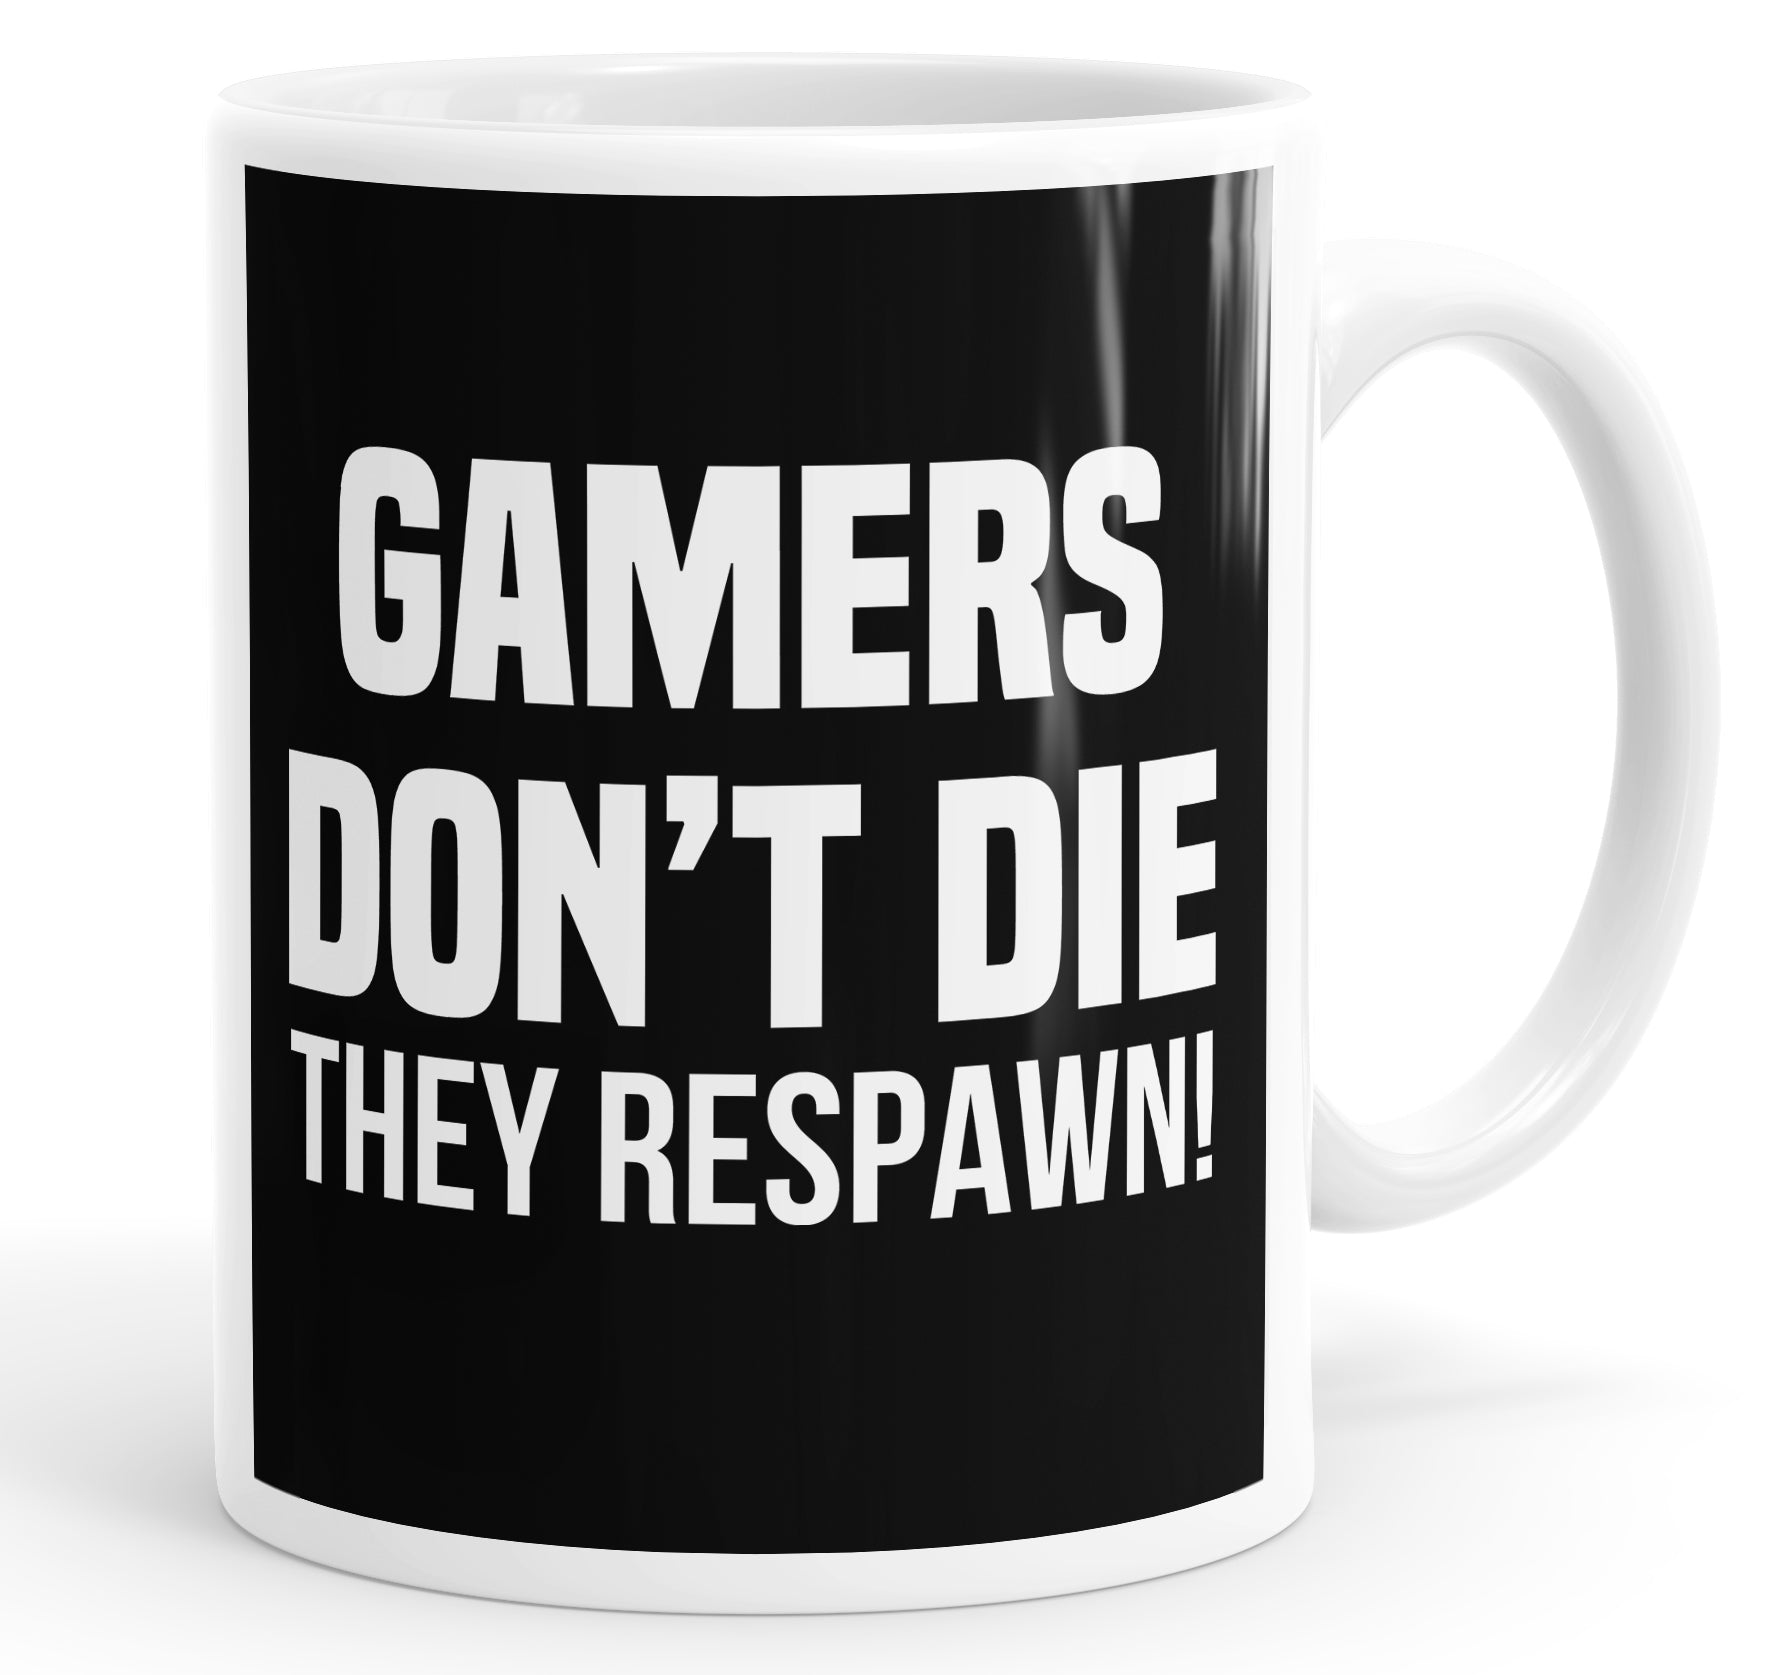 Gamers Don't Die They Respawn Mug Cup